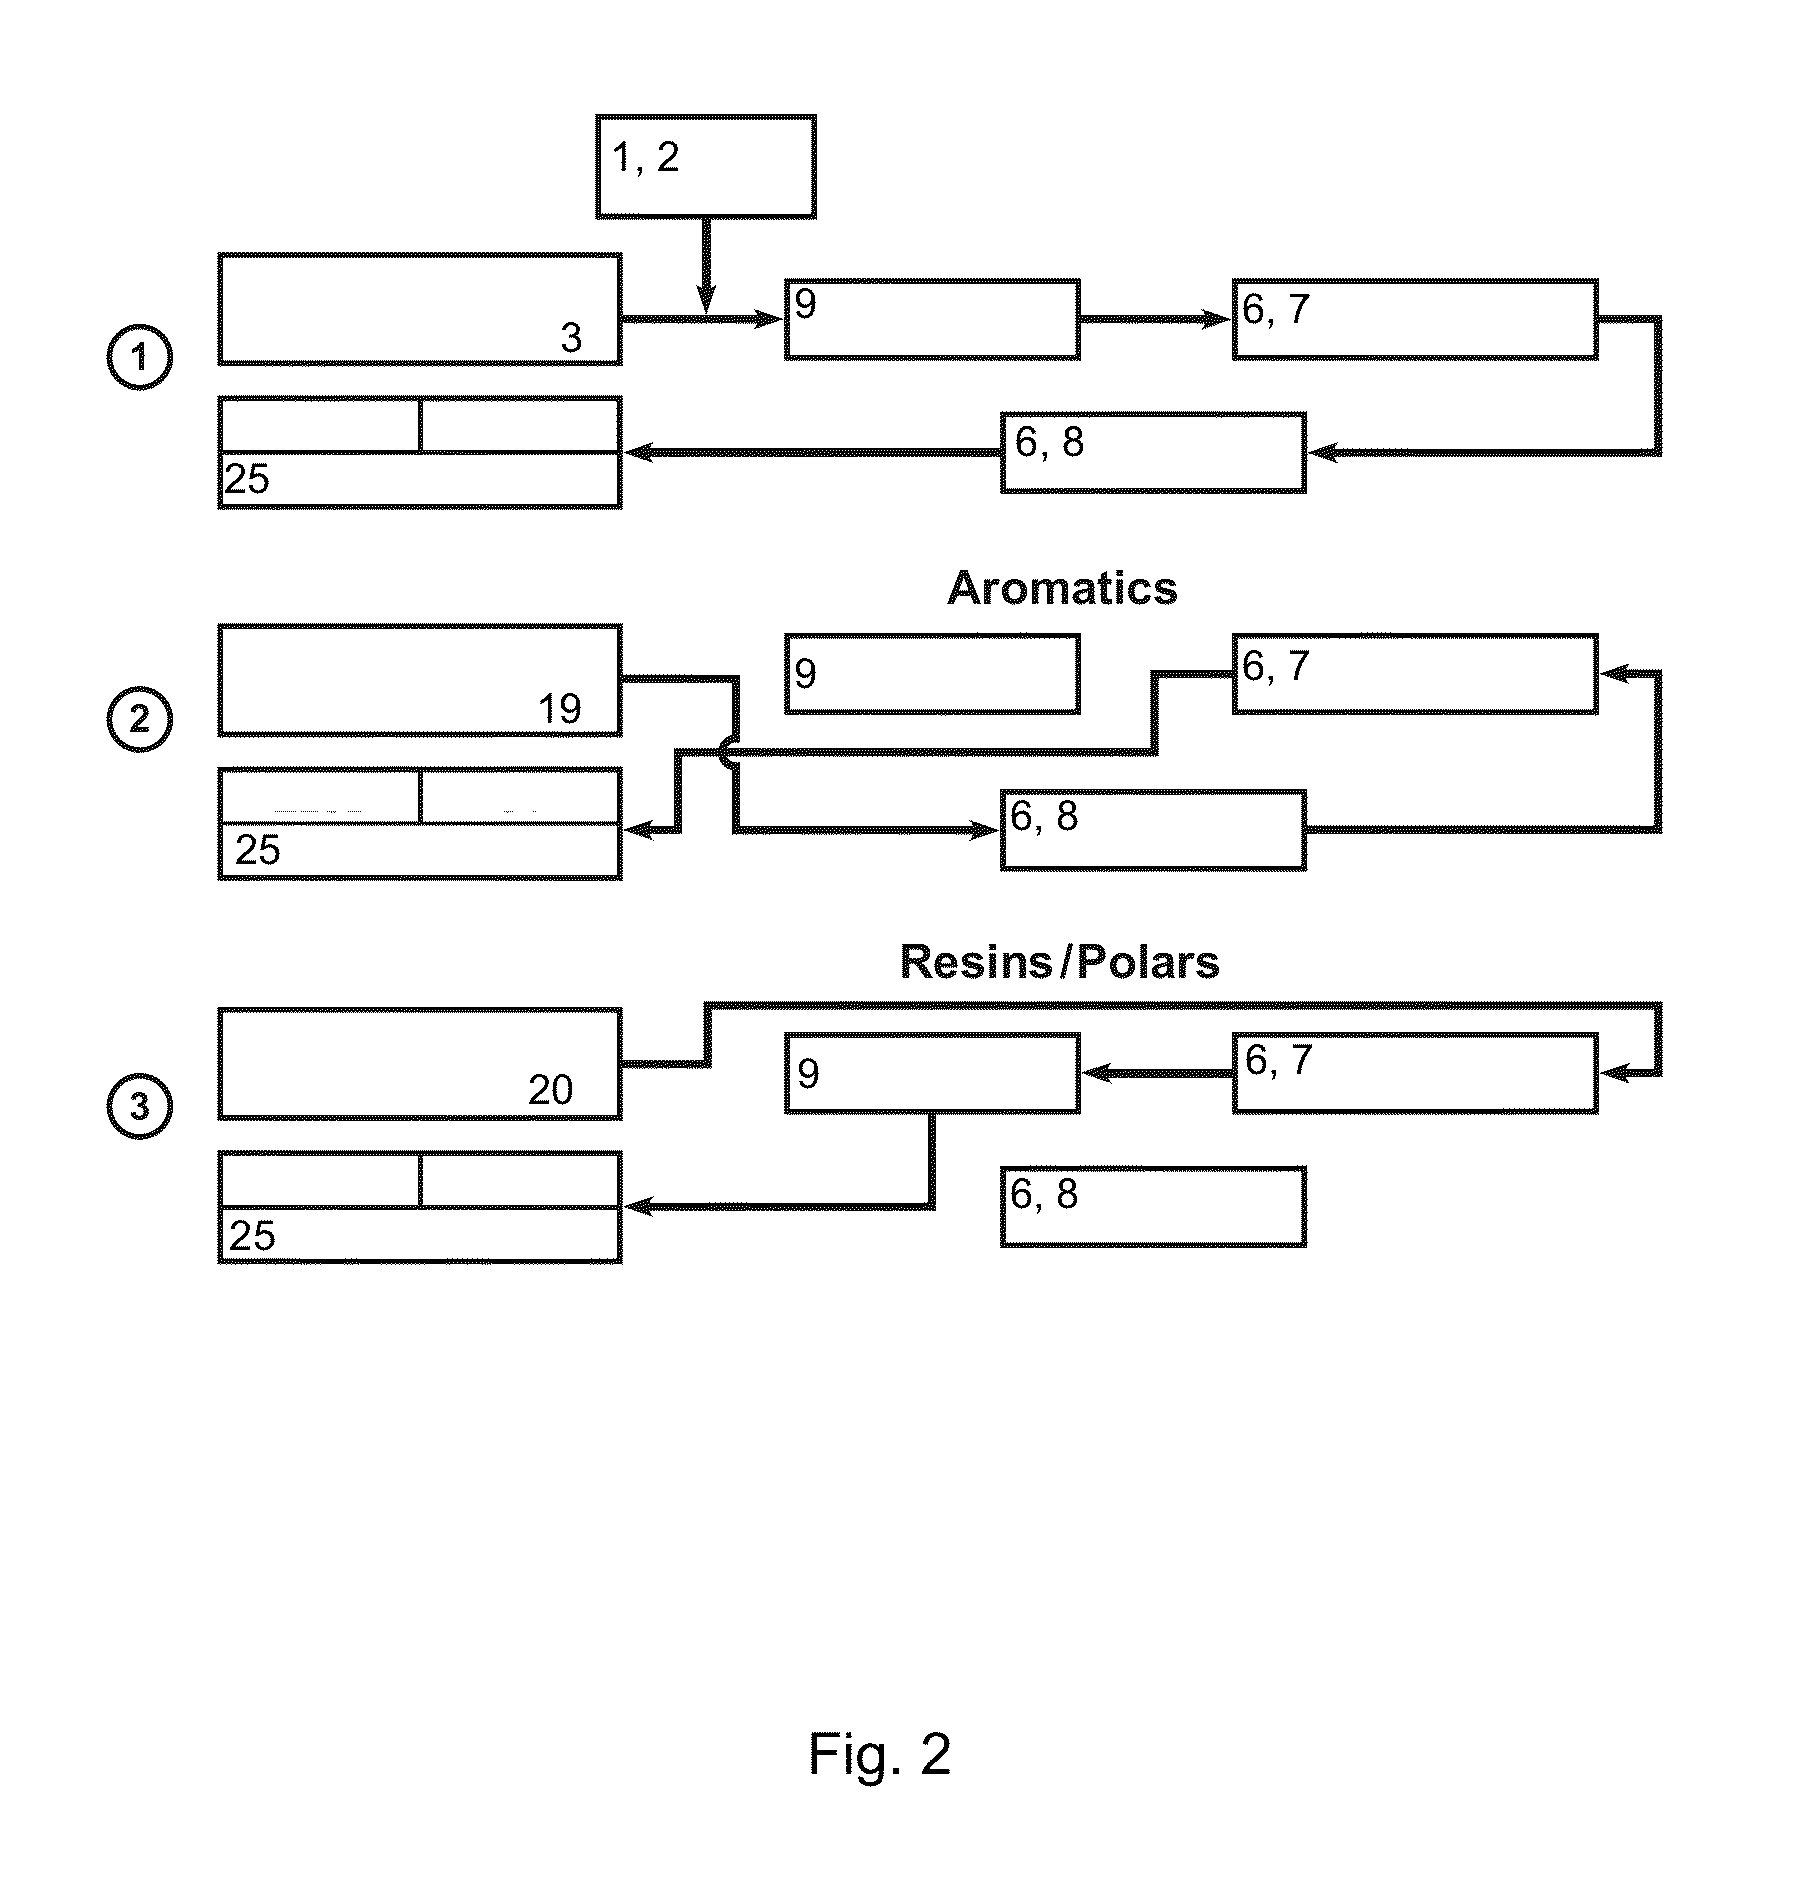 Hydrocarbon Separation and Analysis Apparatus and Methods